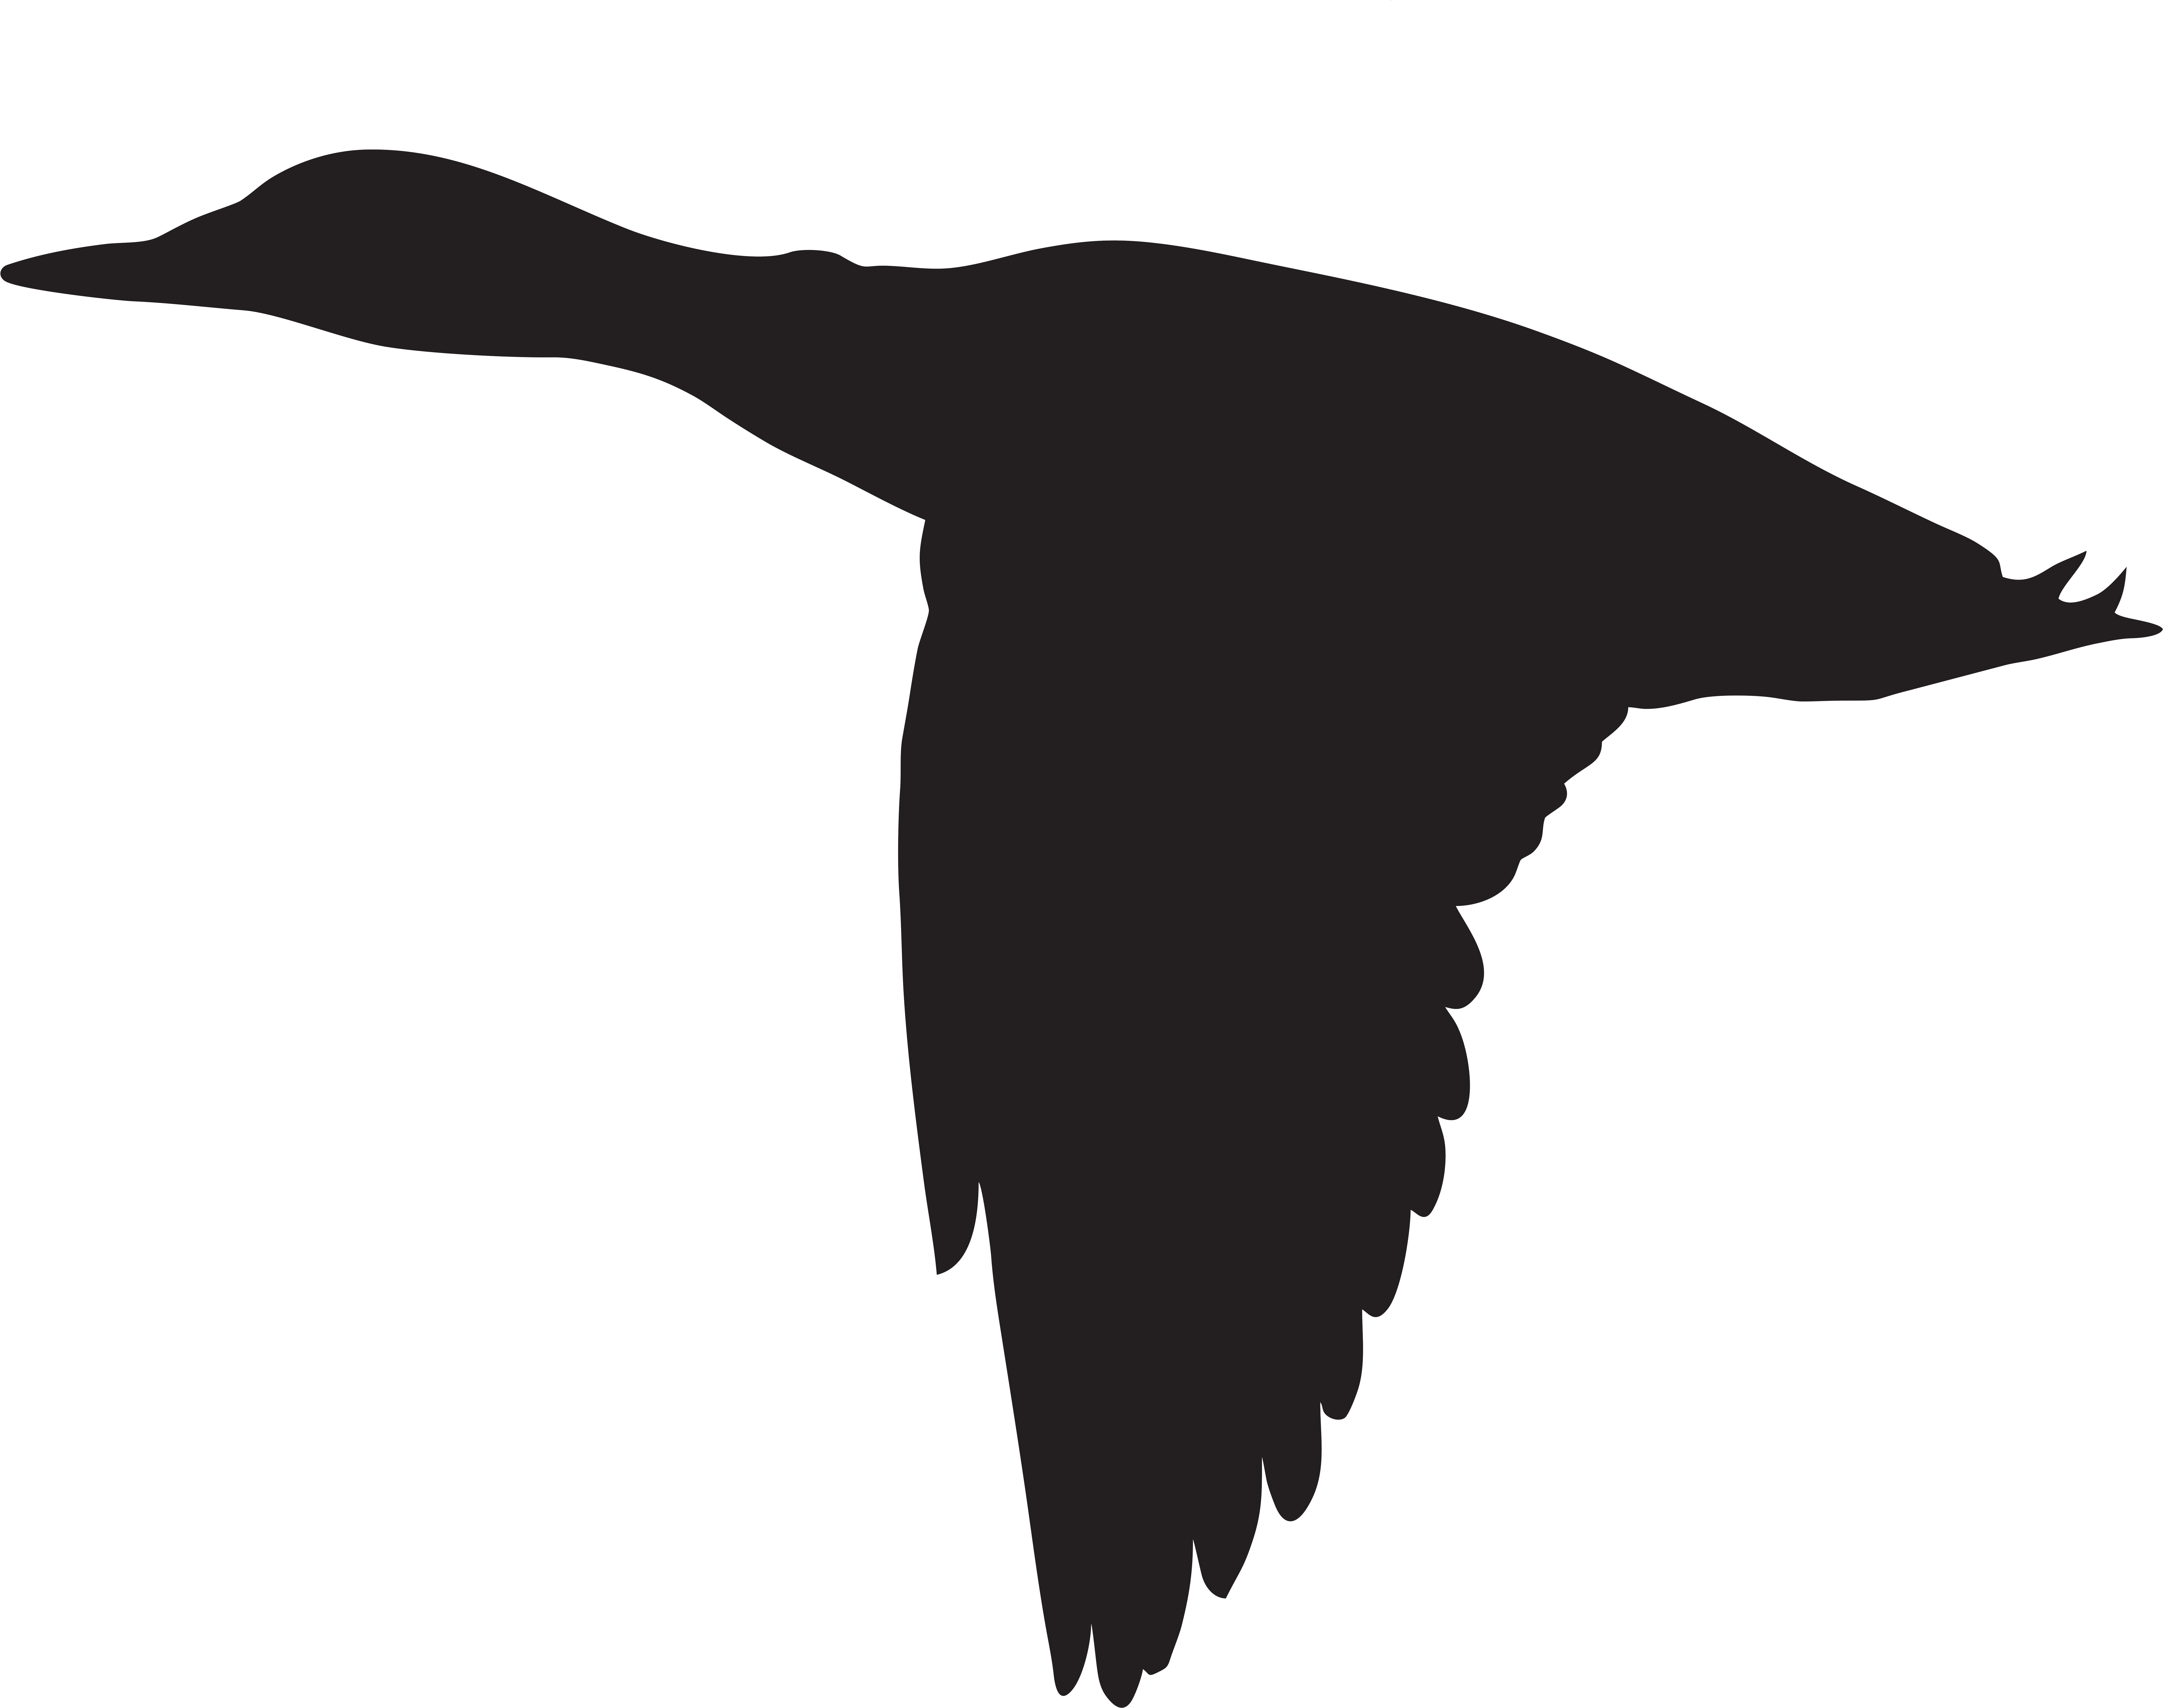 Duck Flying Silhouette Png Clip Art Image - Duck Flying Silhouette Png Clip Art Image (8000x6316)